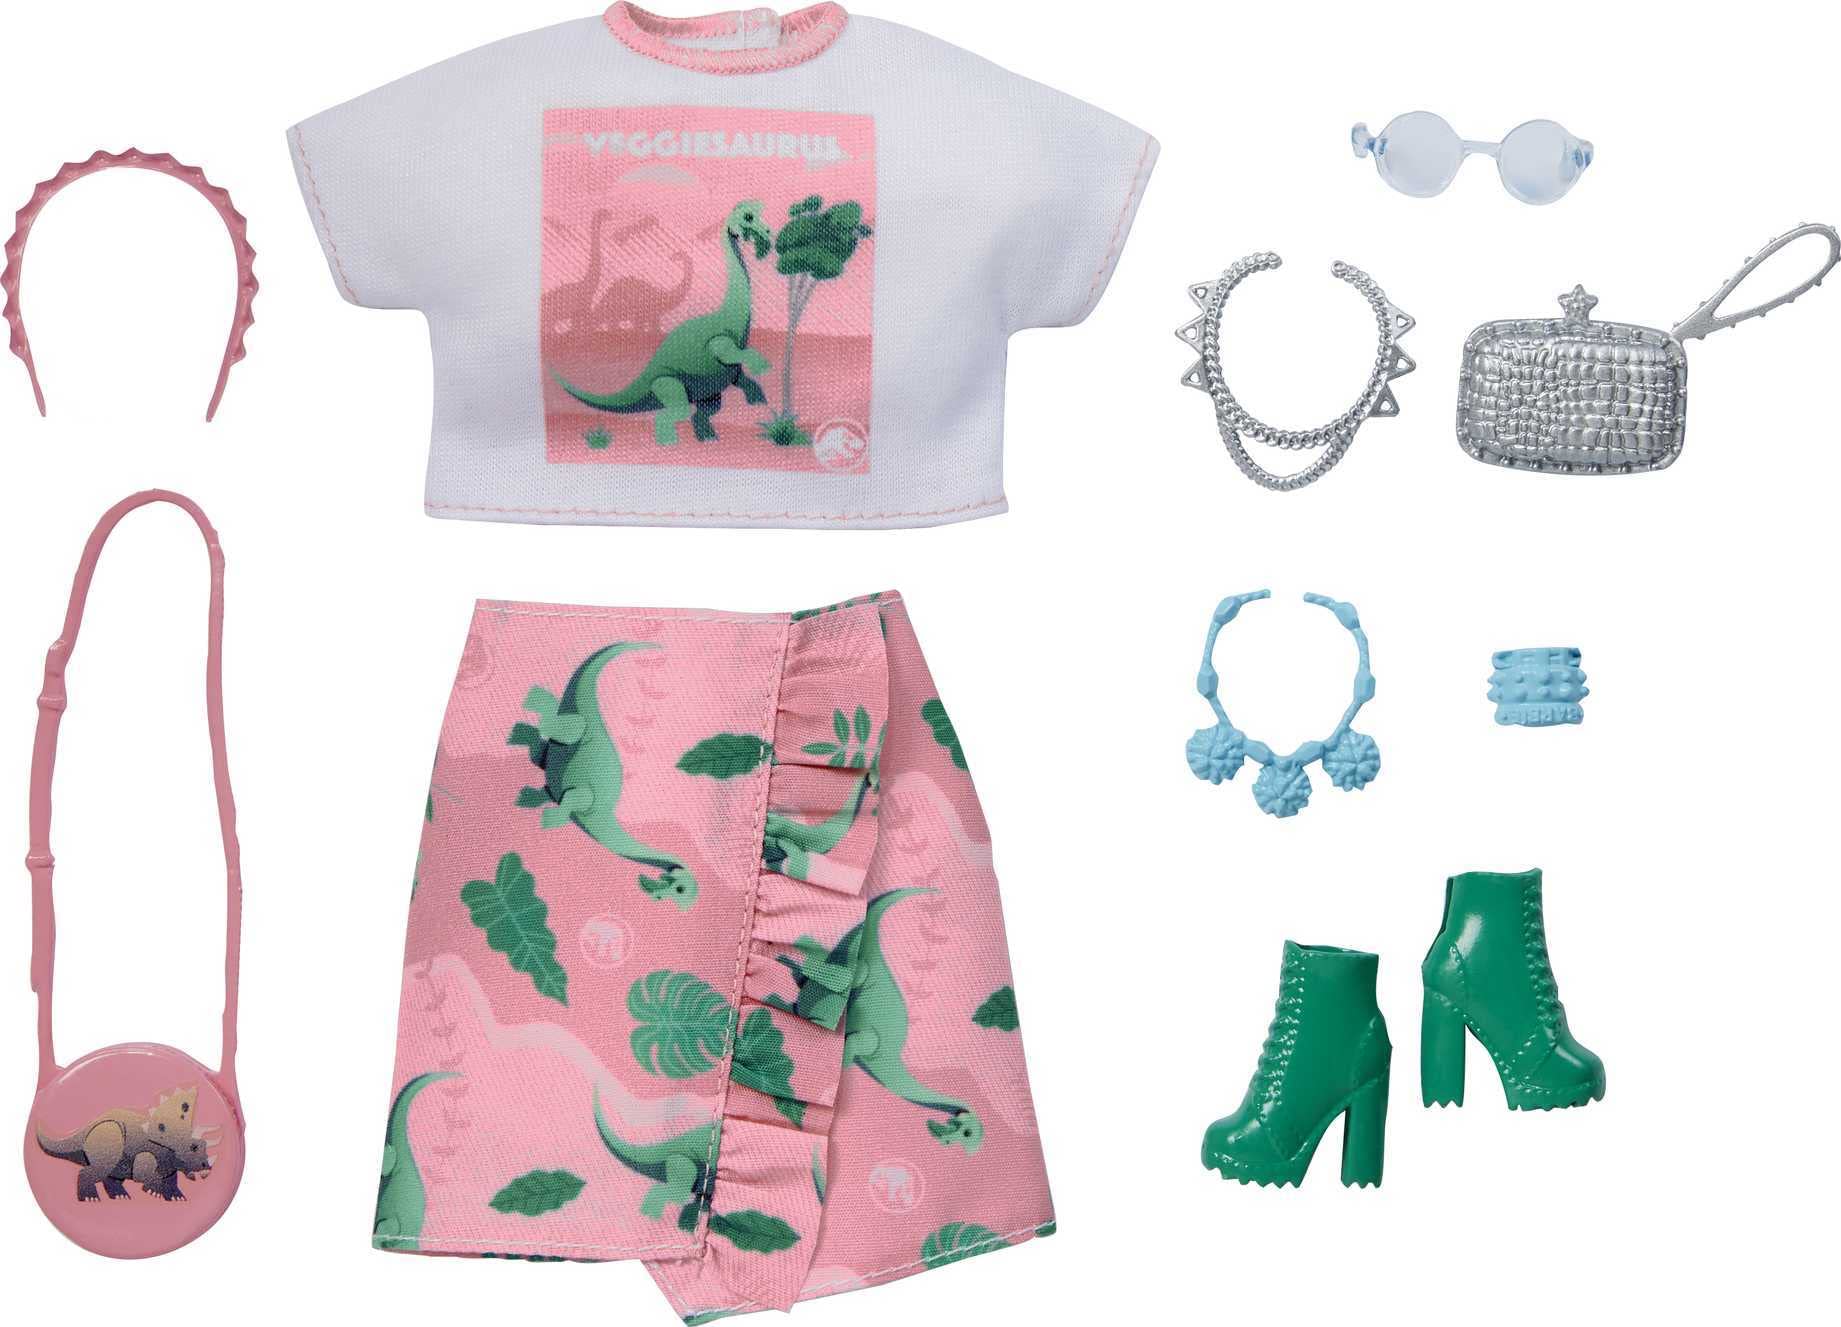 Barbie Clothing & Accessories Inspired by Jurassic World with 10 Storytelling Pieces Dolls: Crop Top & Mini Skirt, Ankle Boots, Purse, Clutch Sunglasses & More, Gift for 3 to 8 Year Olds